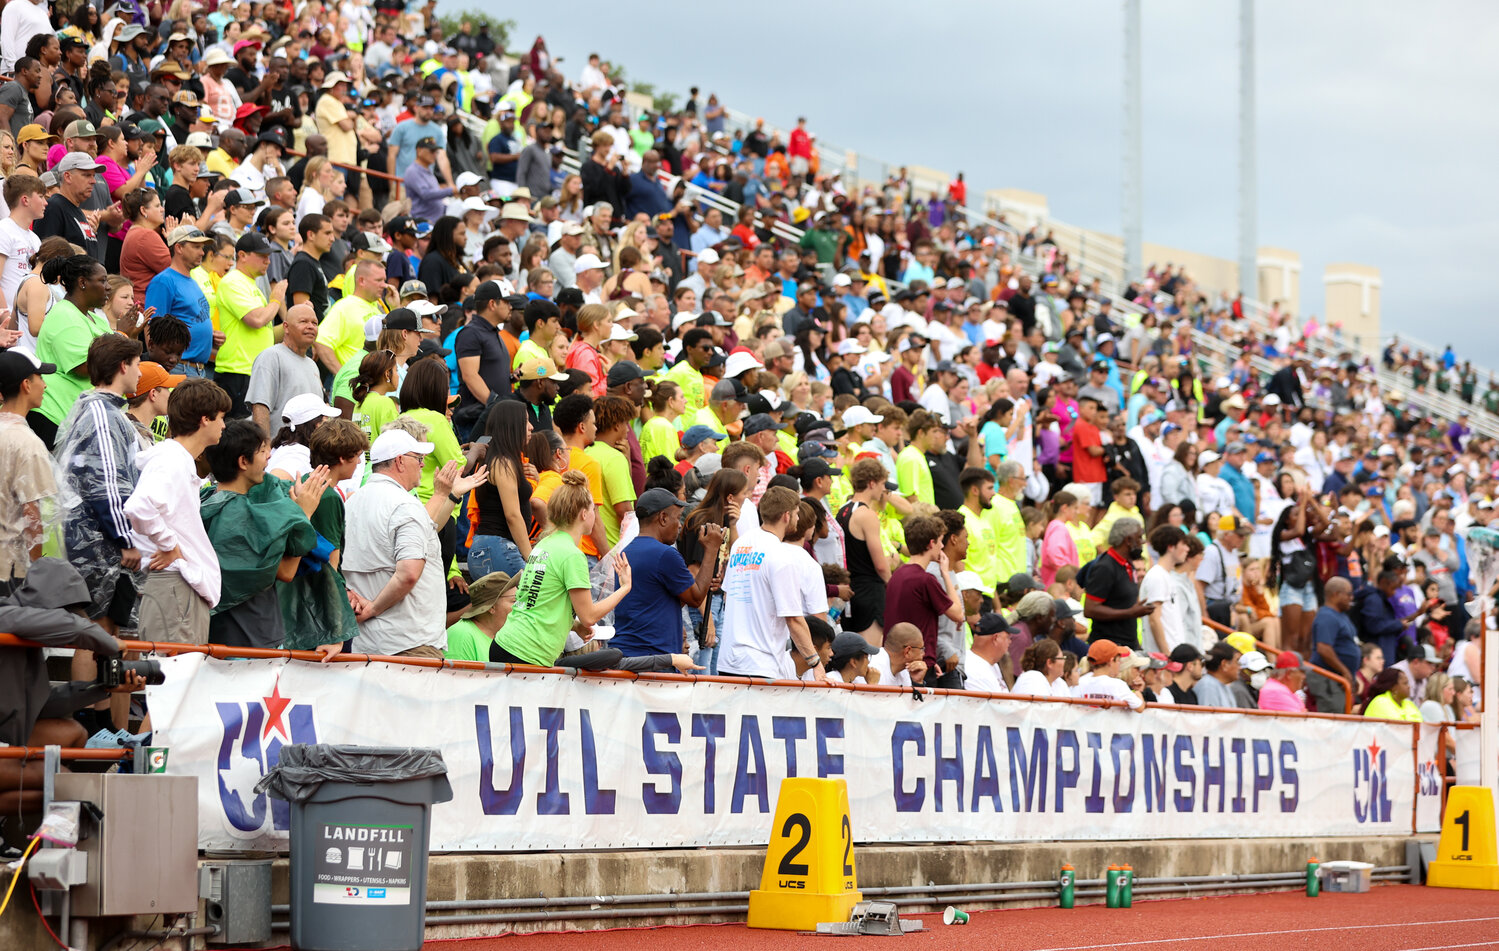 Fans watch the late afternoon running events during the UIL State Track and Field Meet on Saturday, May 13, 2023 in Austin.